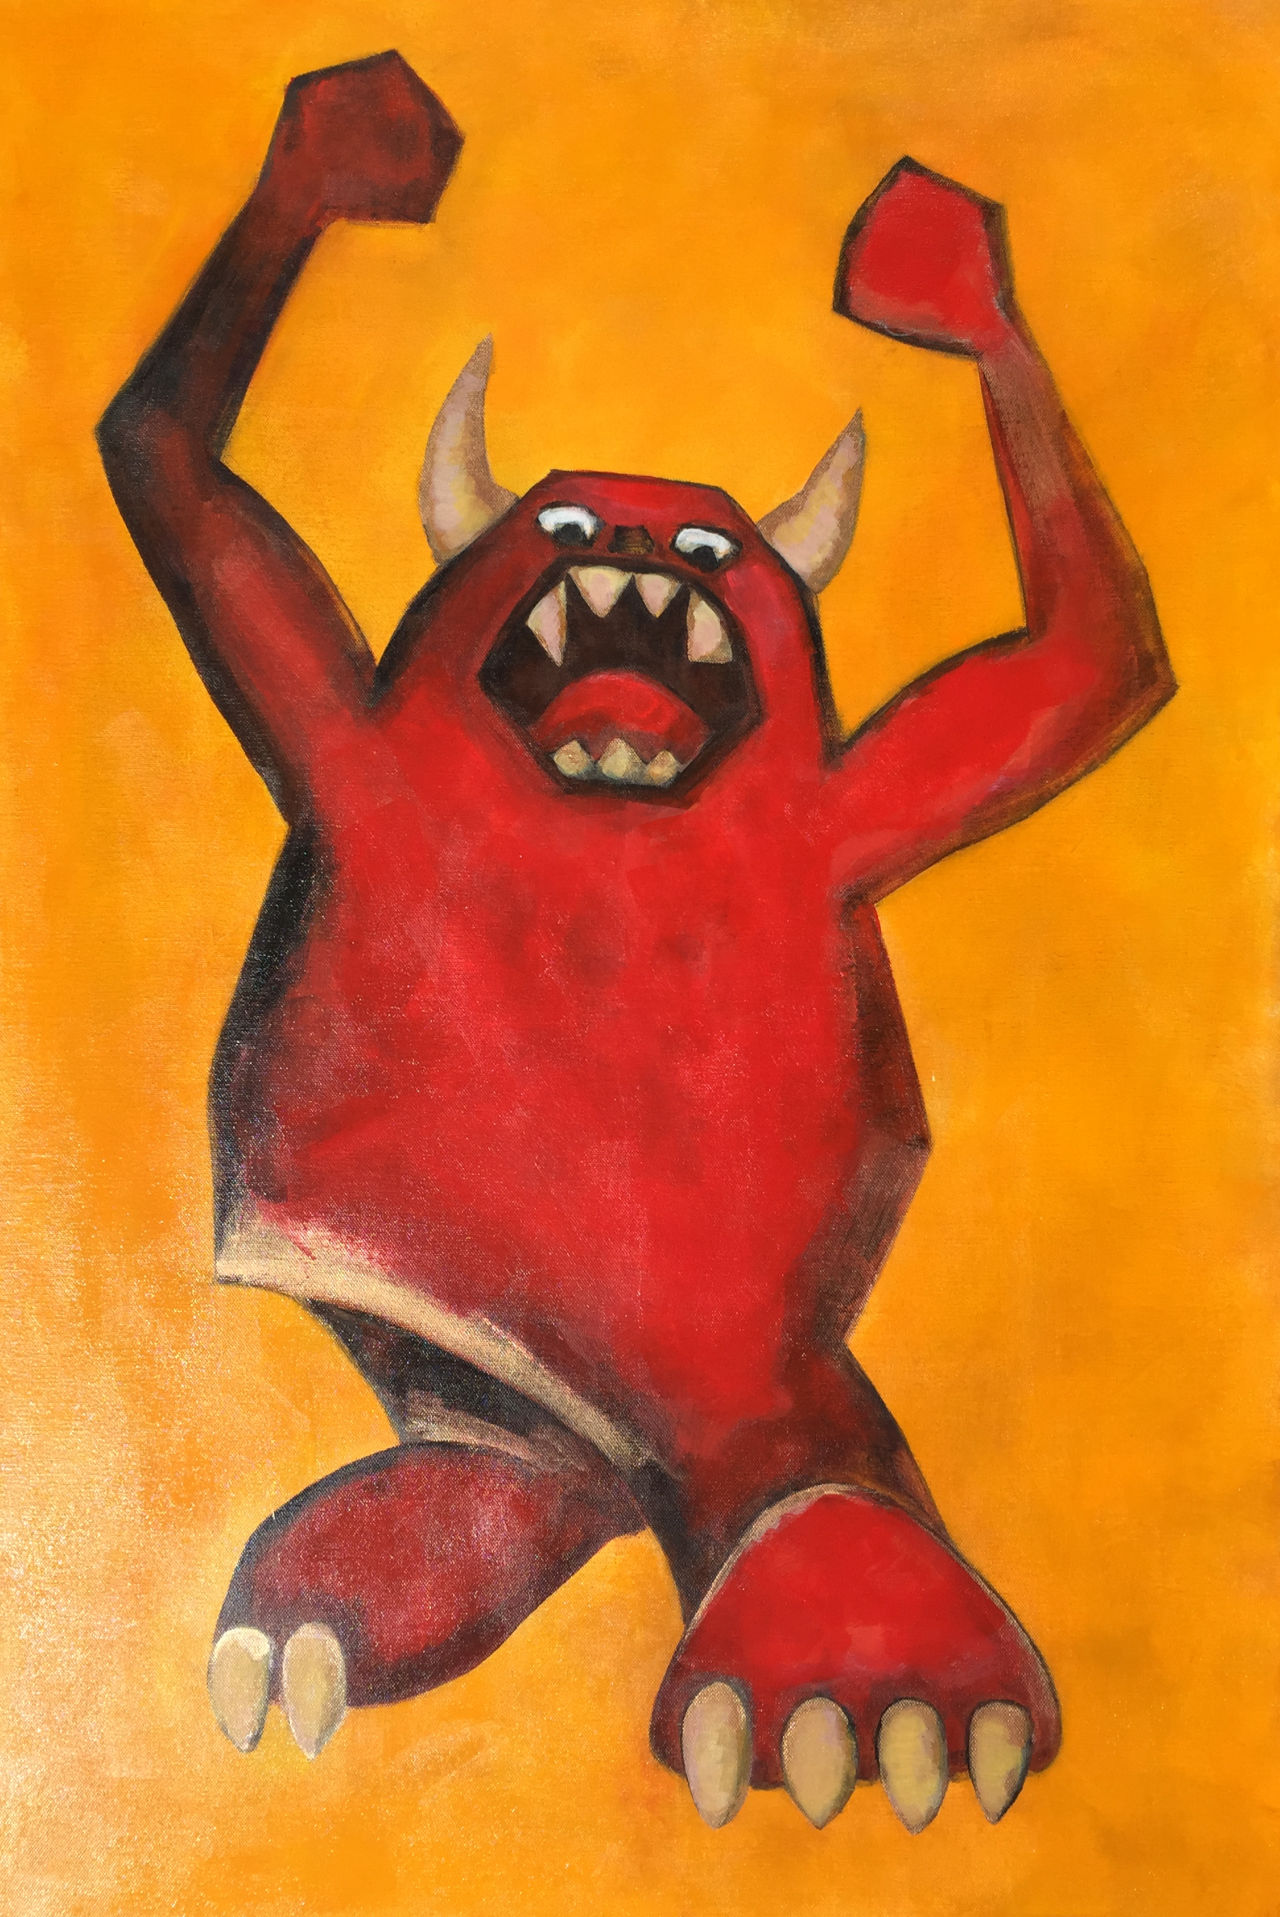 Painting of the Beast from the book Rabbit's Wit.